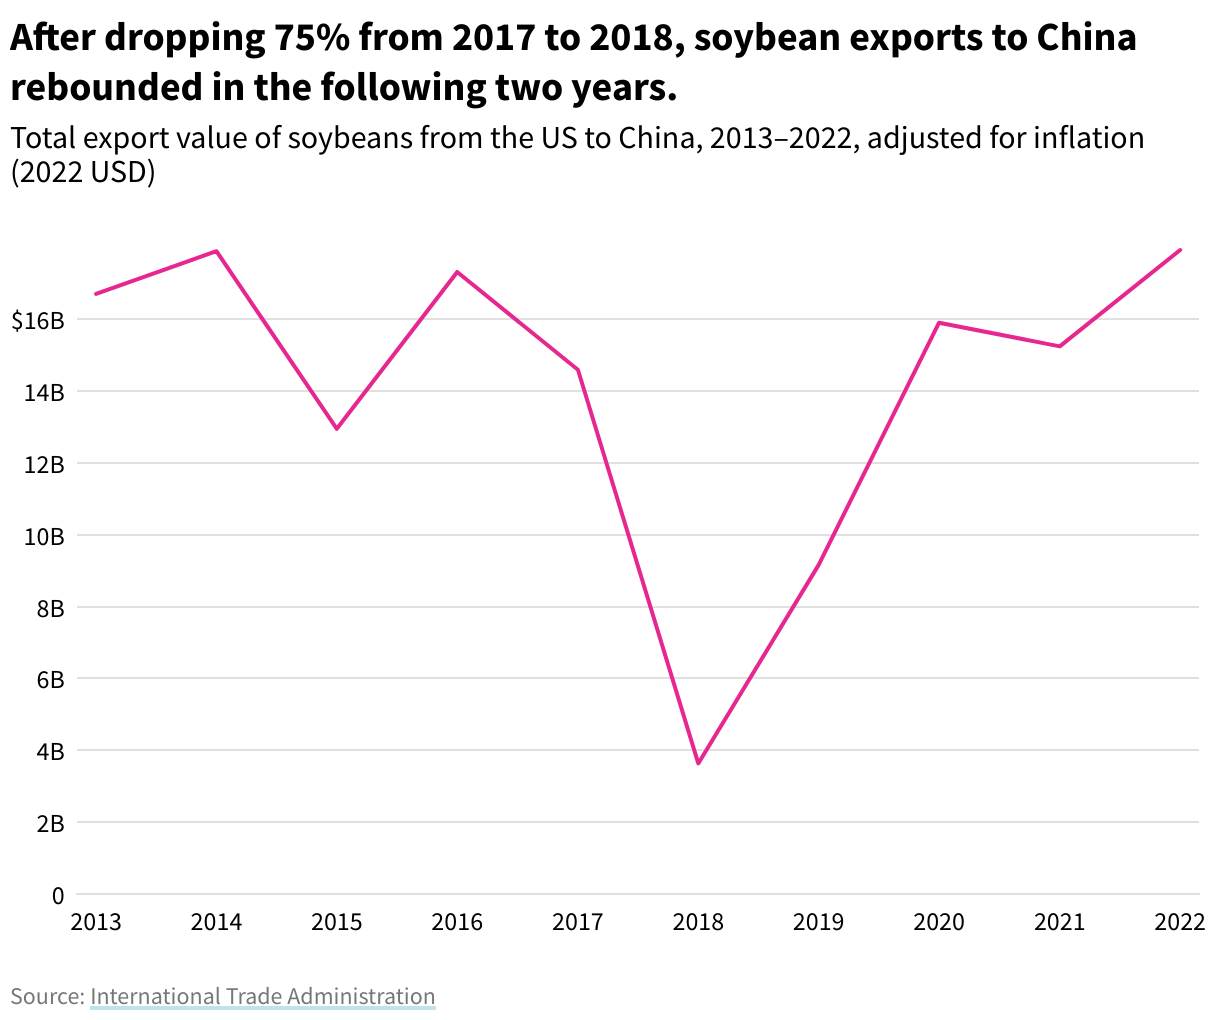 A line chart showing a 75% drop in US soybean exports to China from 2017 to 2018, followed by a full rebound in the following two years.